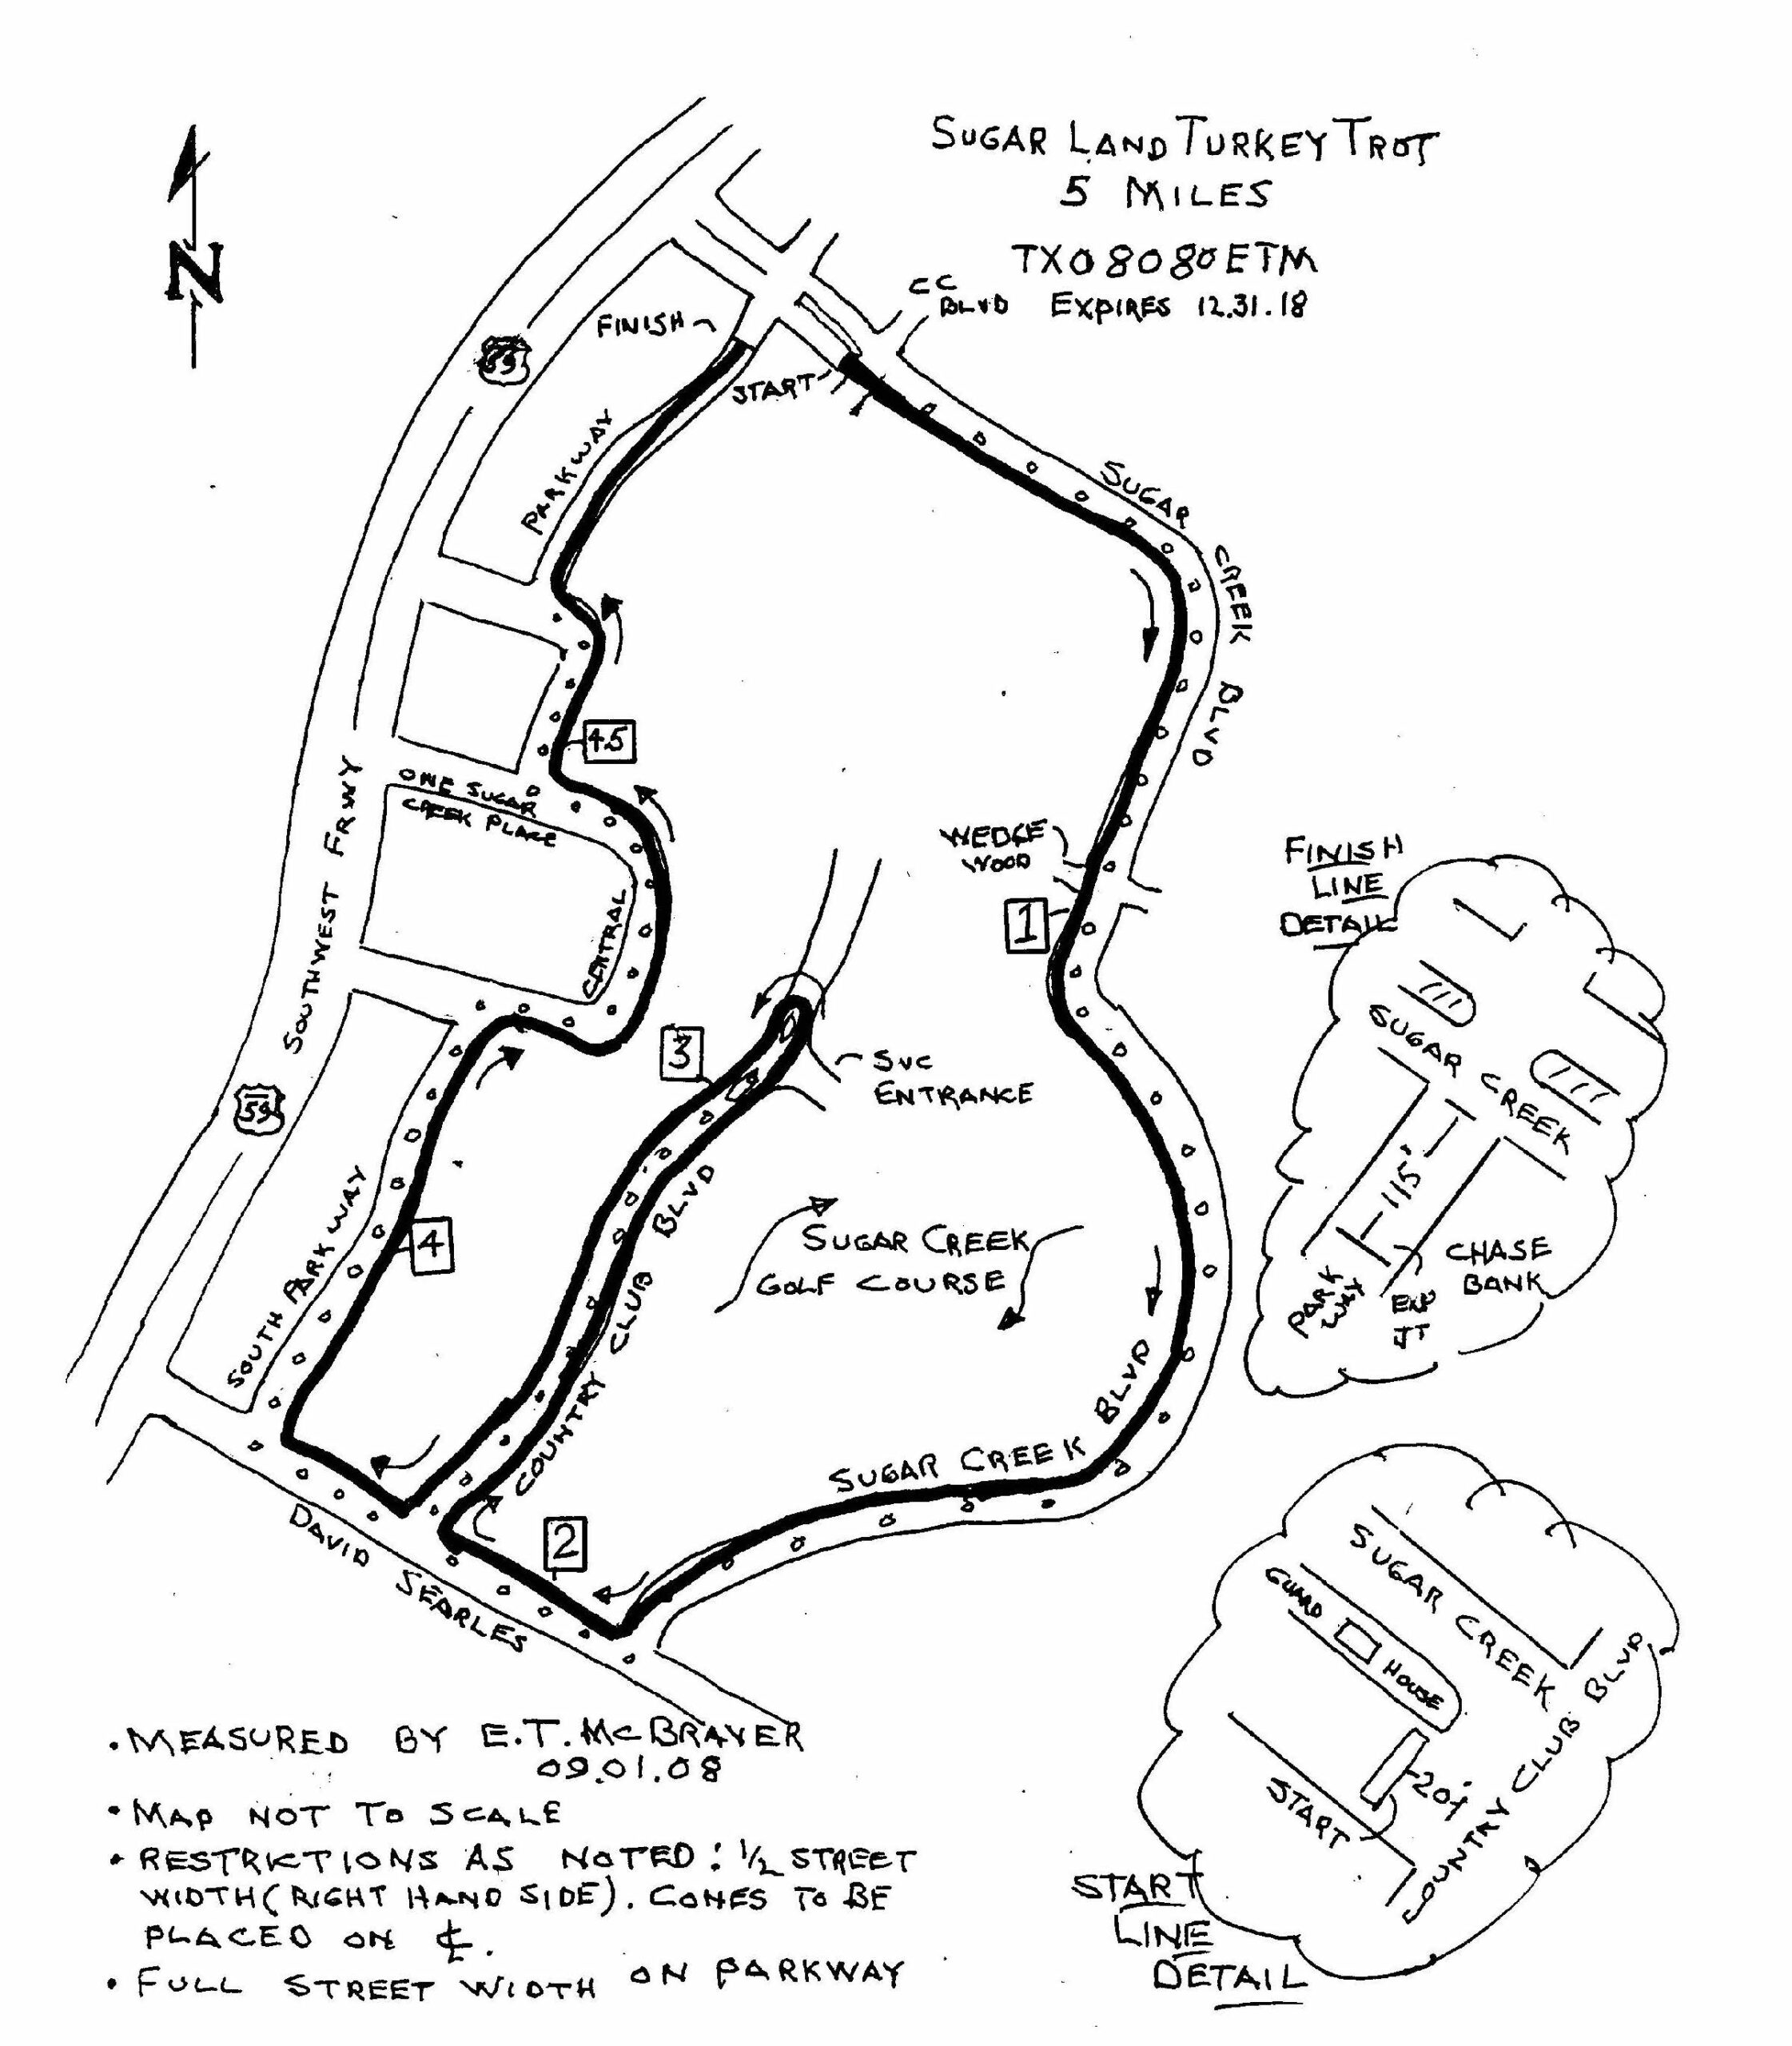 sugar-land-turkey-trot-official-map_Page_1